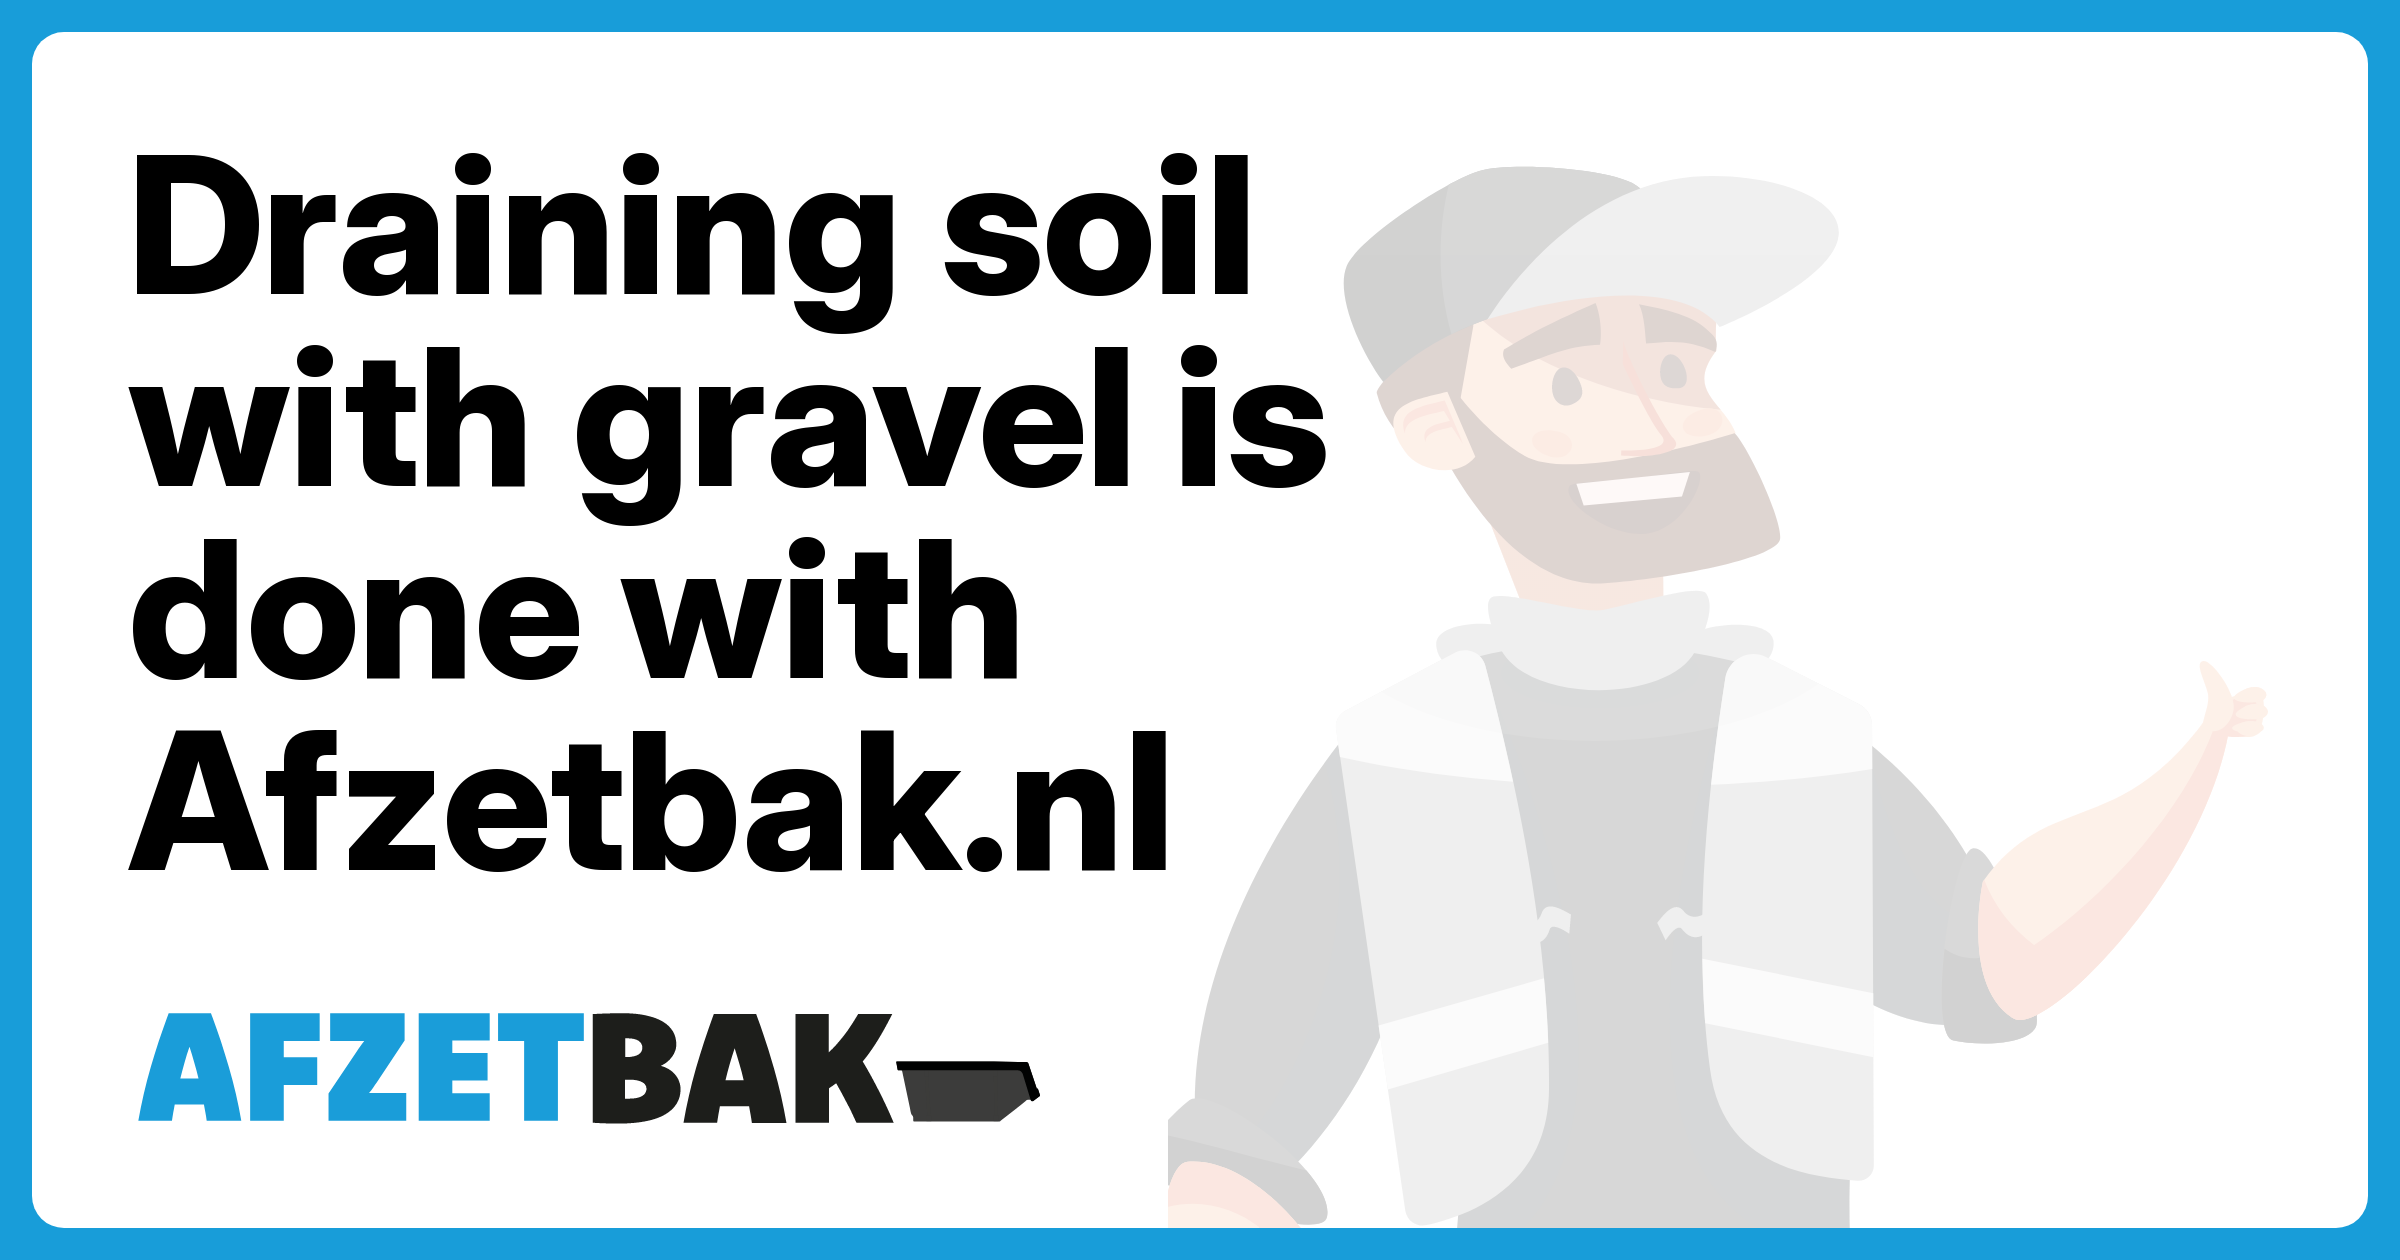 Draining soil with gravel is done with Afzetbak.nl - Afzetbak.nl